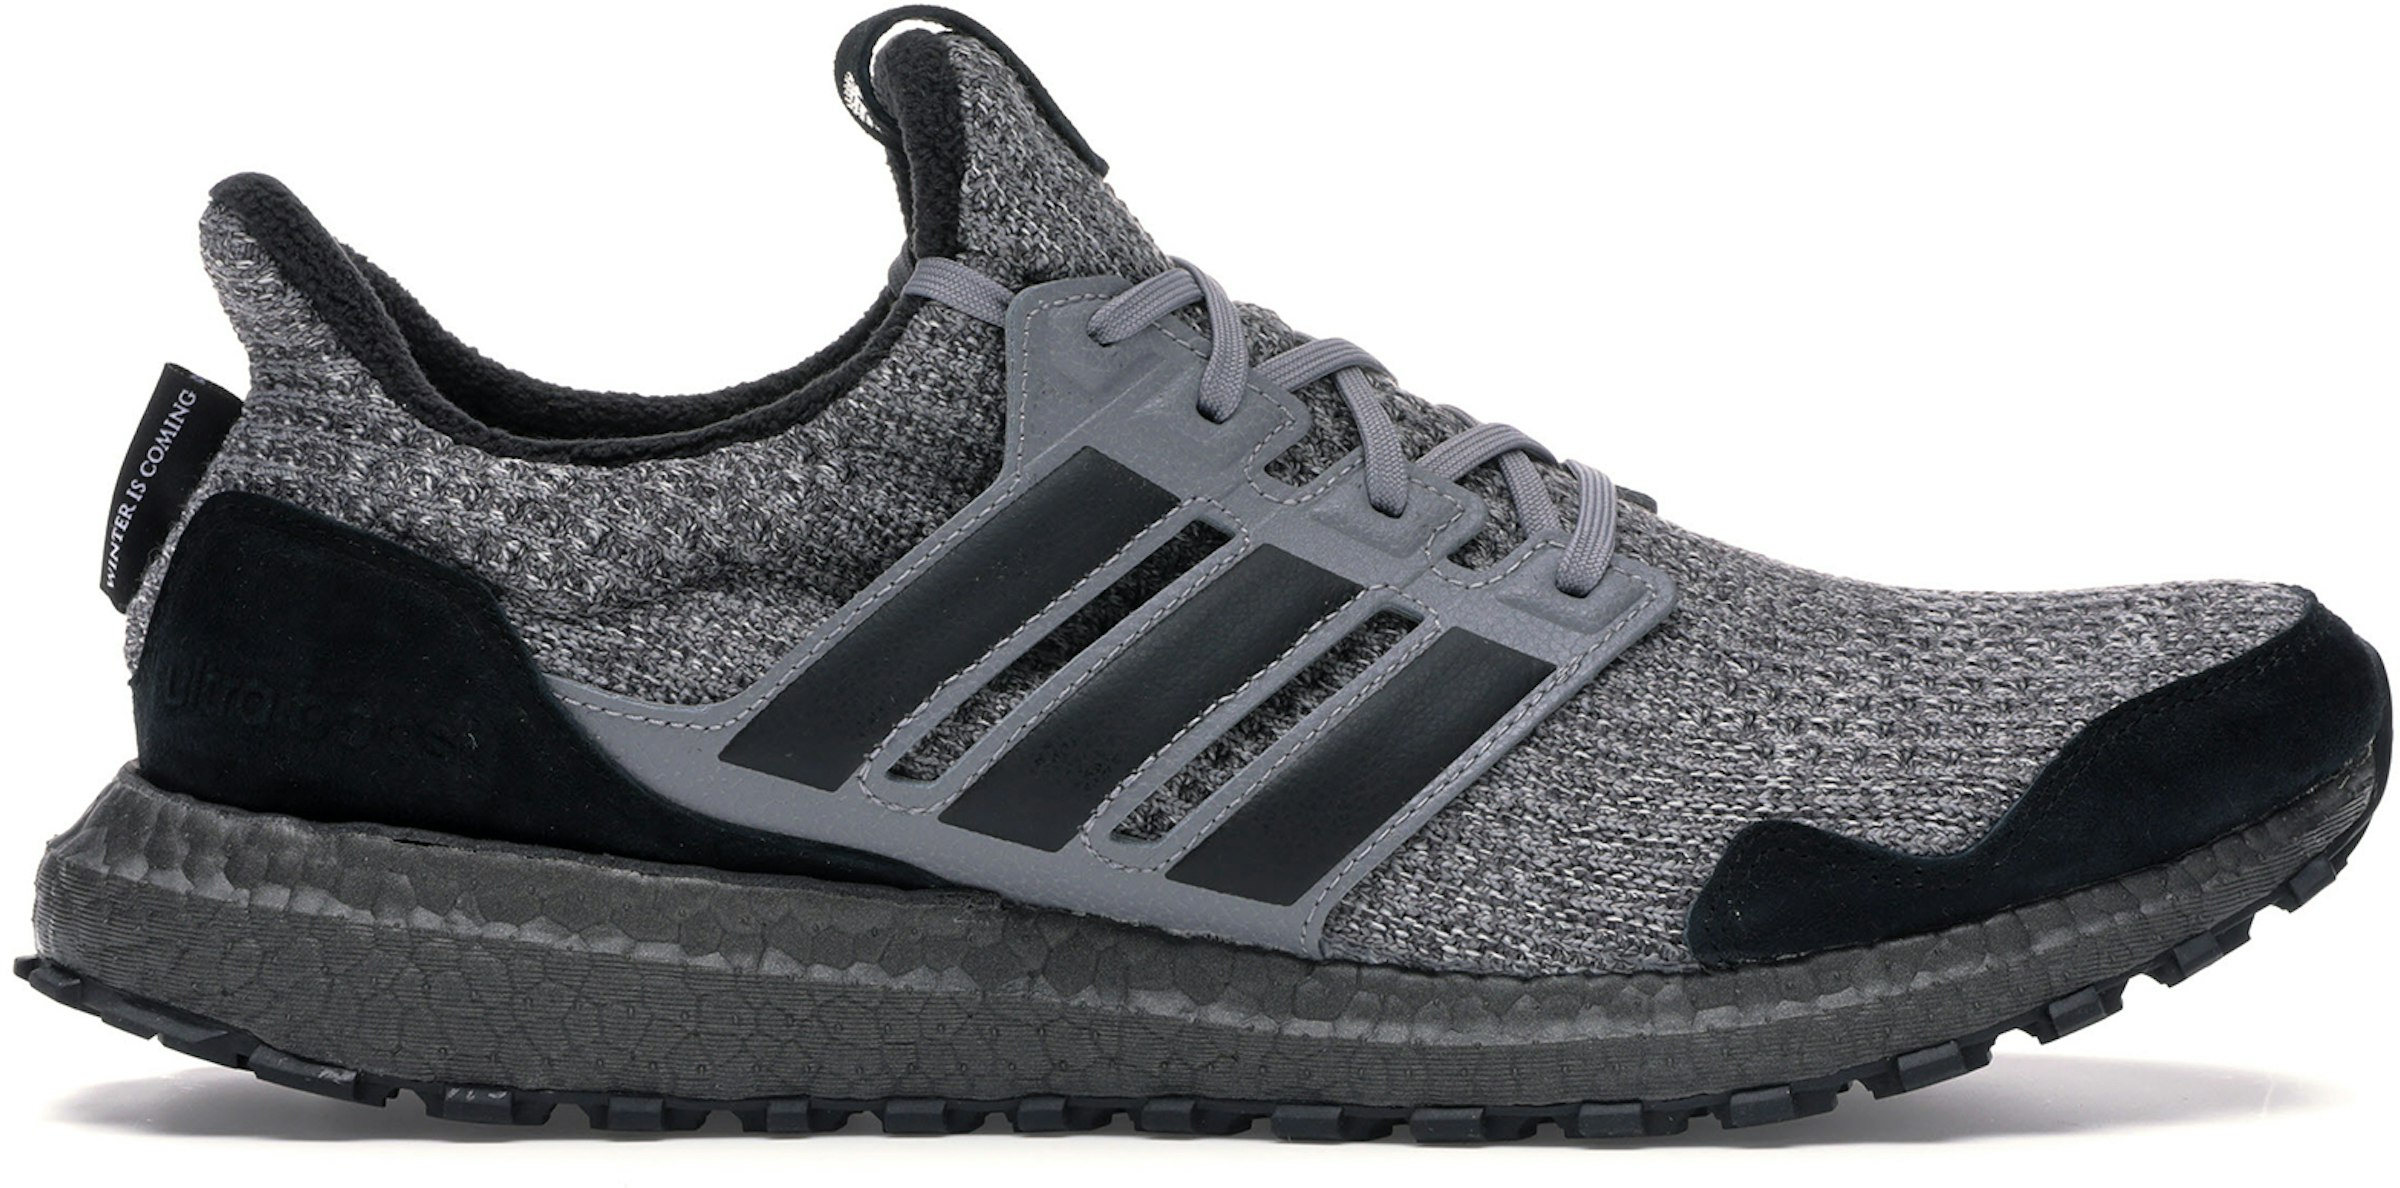 Zuidwest Executie exegese adidas Ultra Boost 4.0 Game of Thrones House Stark Men's - EE3706 - US